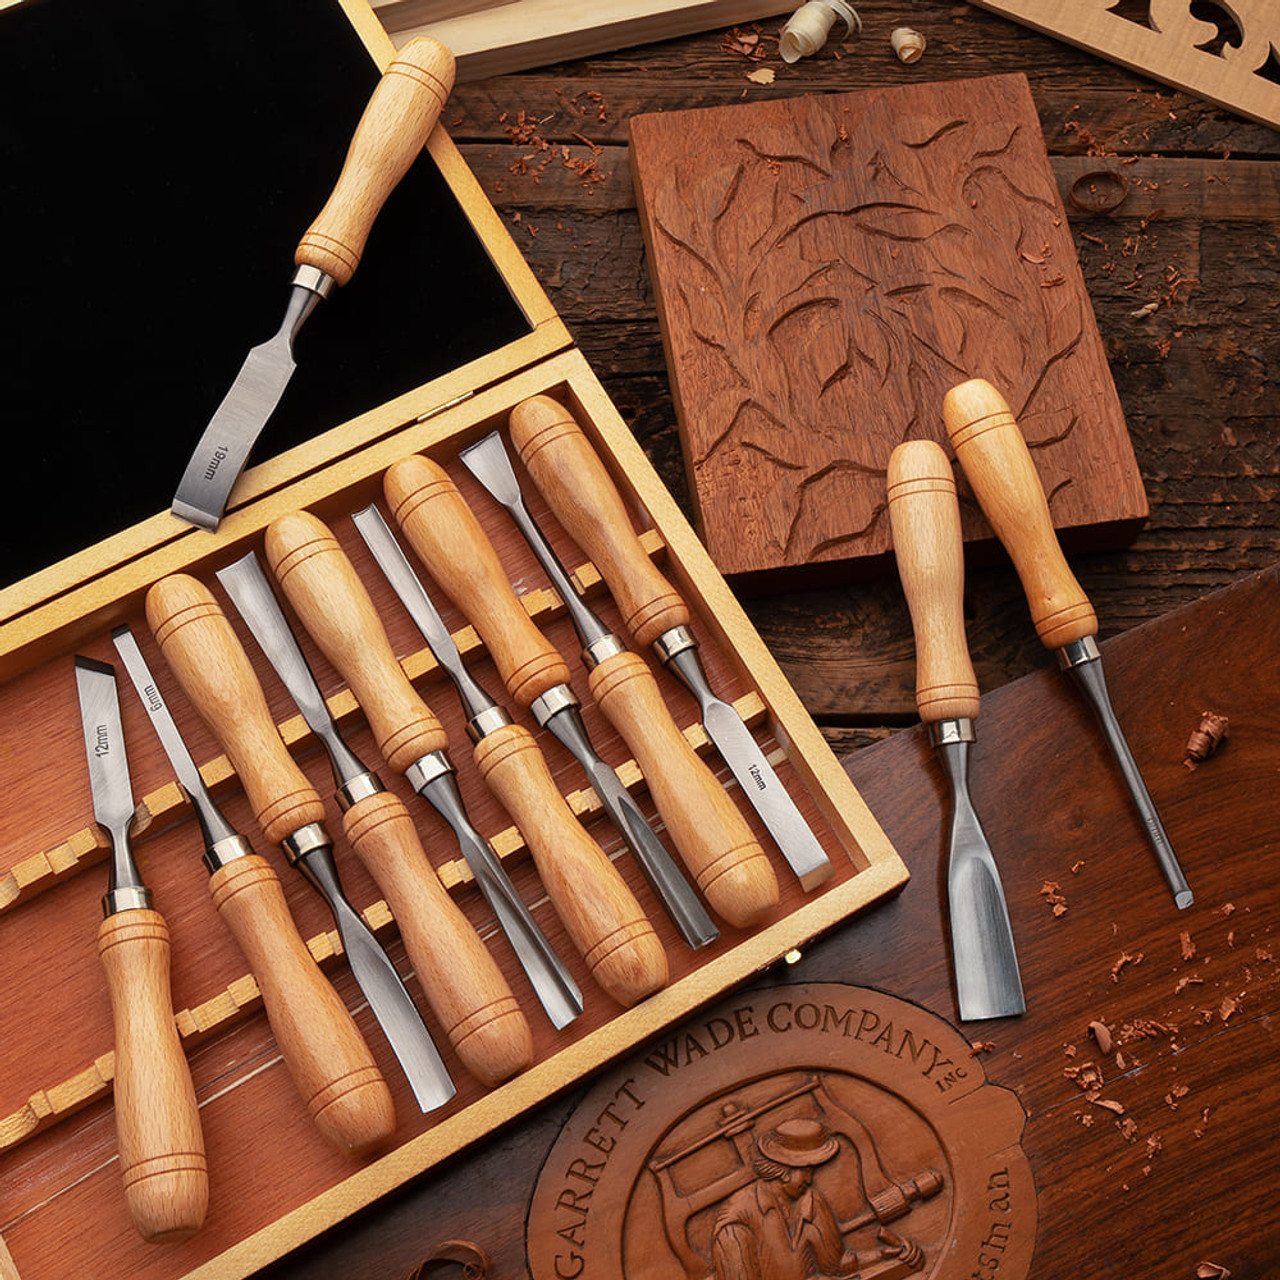 Carving Chisels - Carving Tools - Chisels - Hand Tools